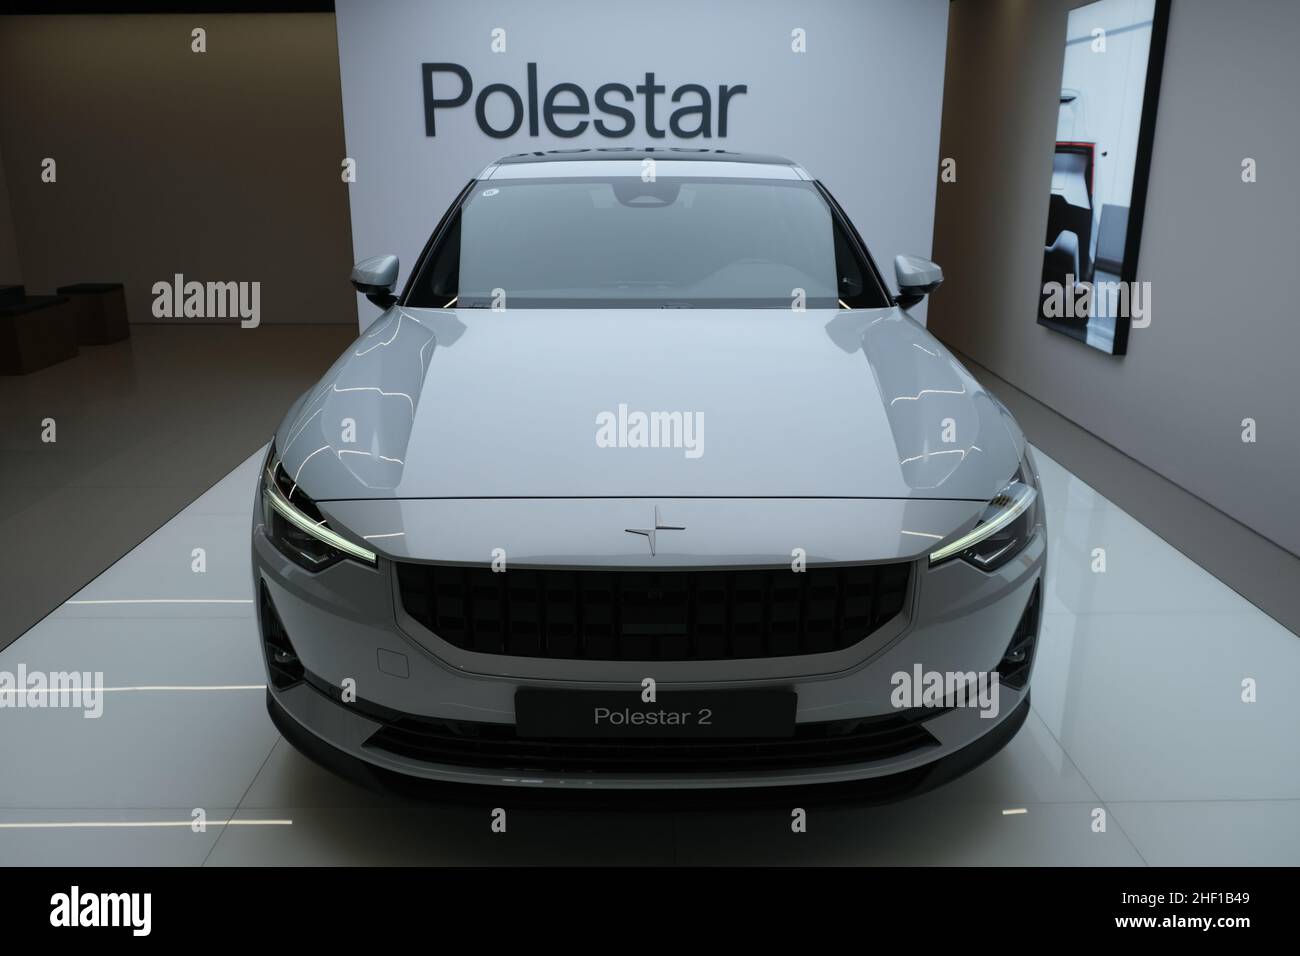 Polestar 2 EV inside store. Front view of Polestar 2 electric car. Polestar is a Swedish car brand owned by Volvo Cars and Geely Stock Photo